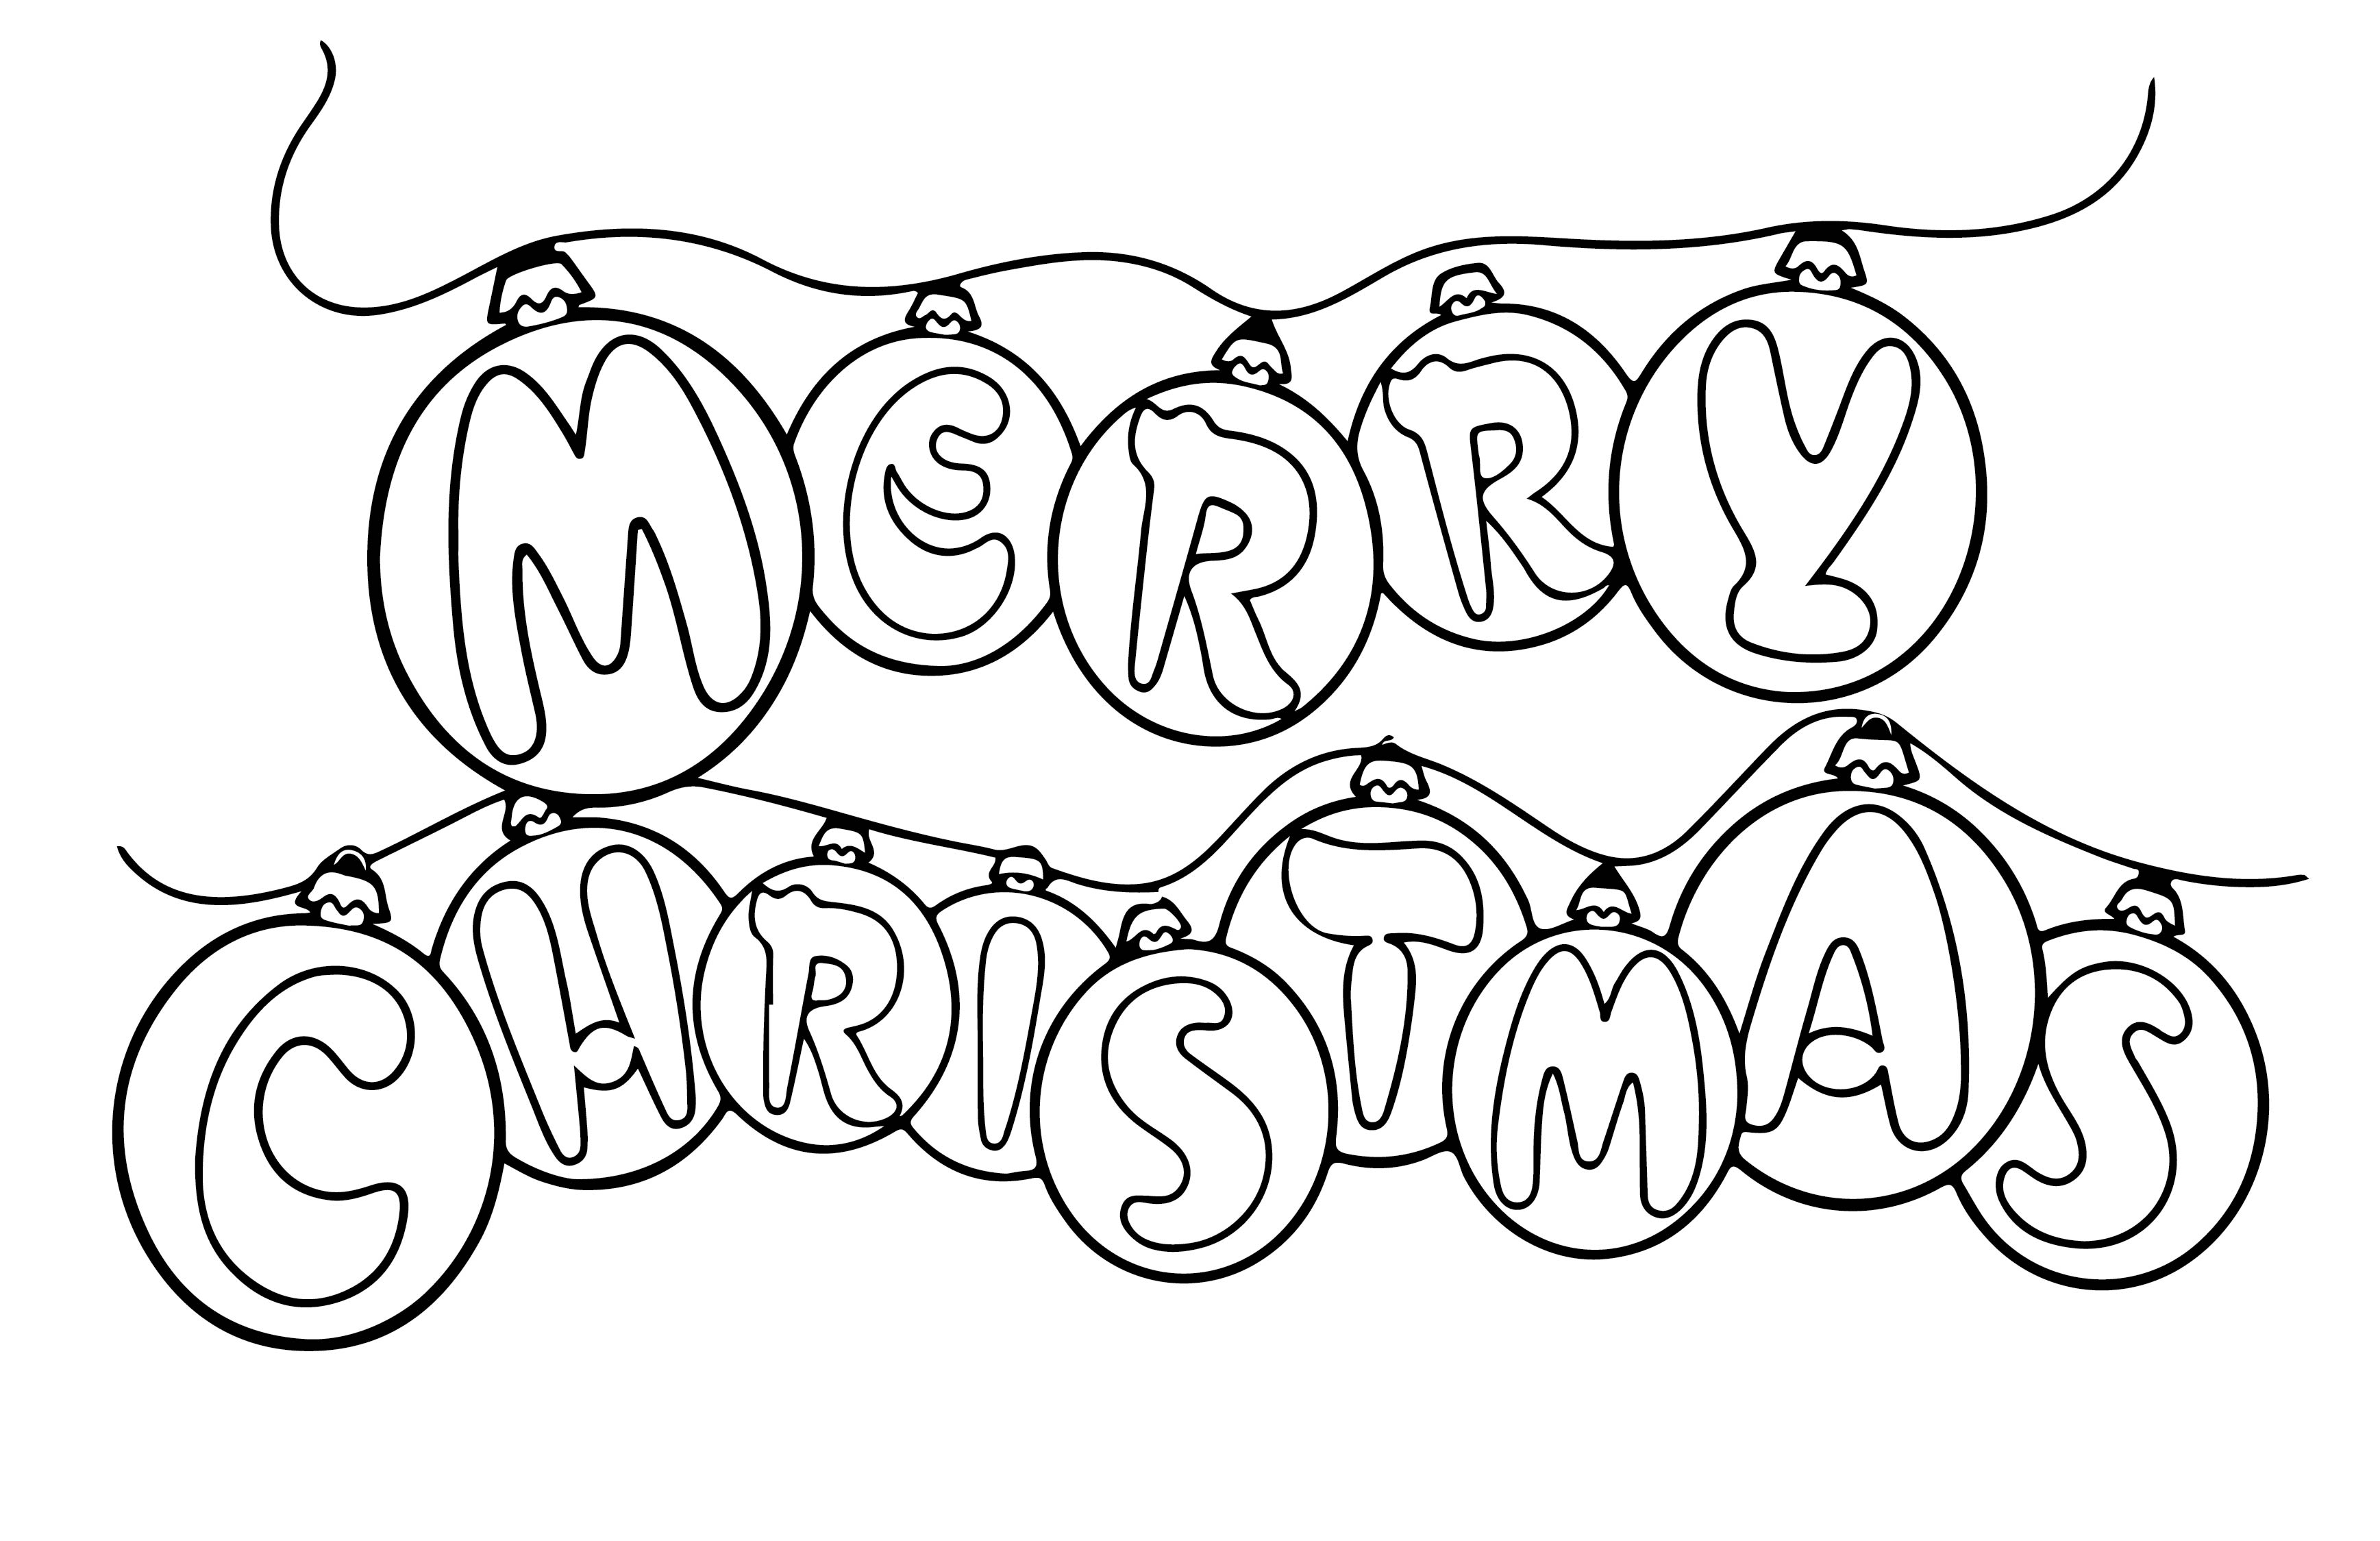 5 Best Images of Christmas Coloring Pages Printable Product - Merry